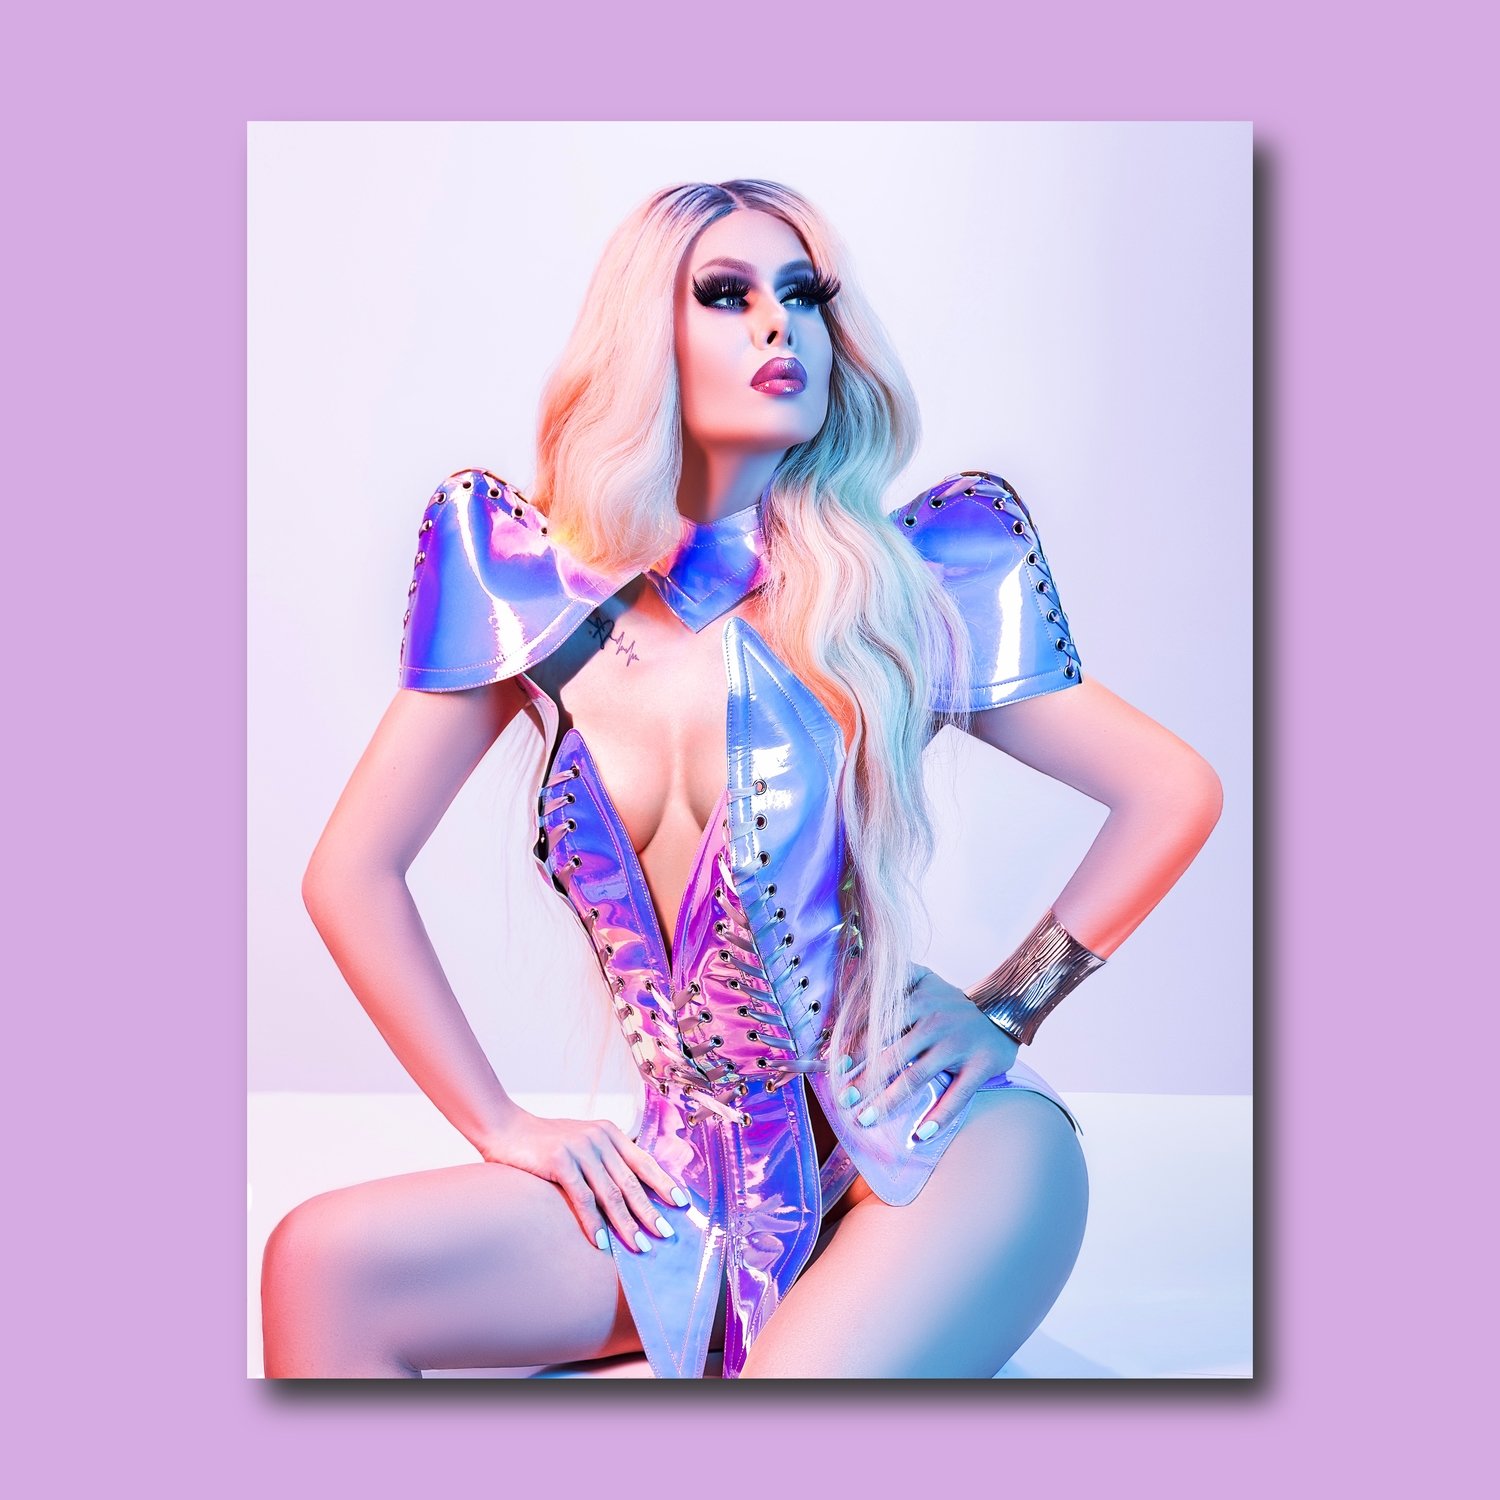 Drag Photographer "Iridescent Armor" (8"x10") SIGNED, Winter 2018 Collection